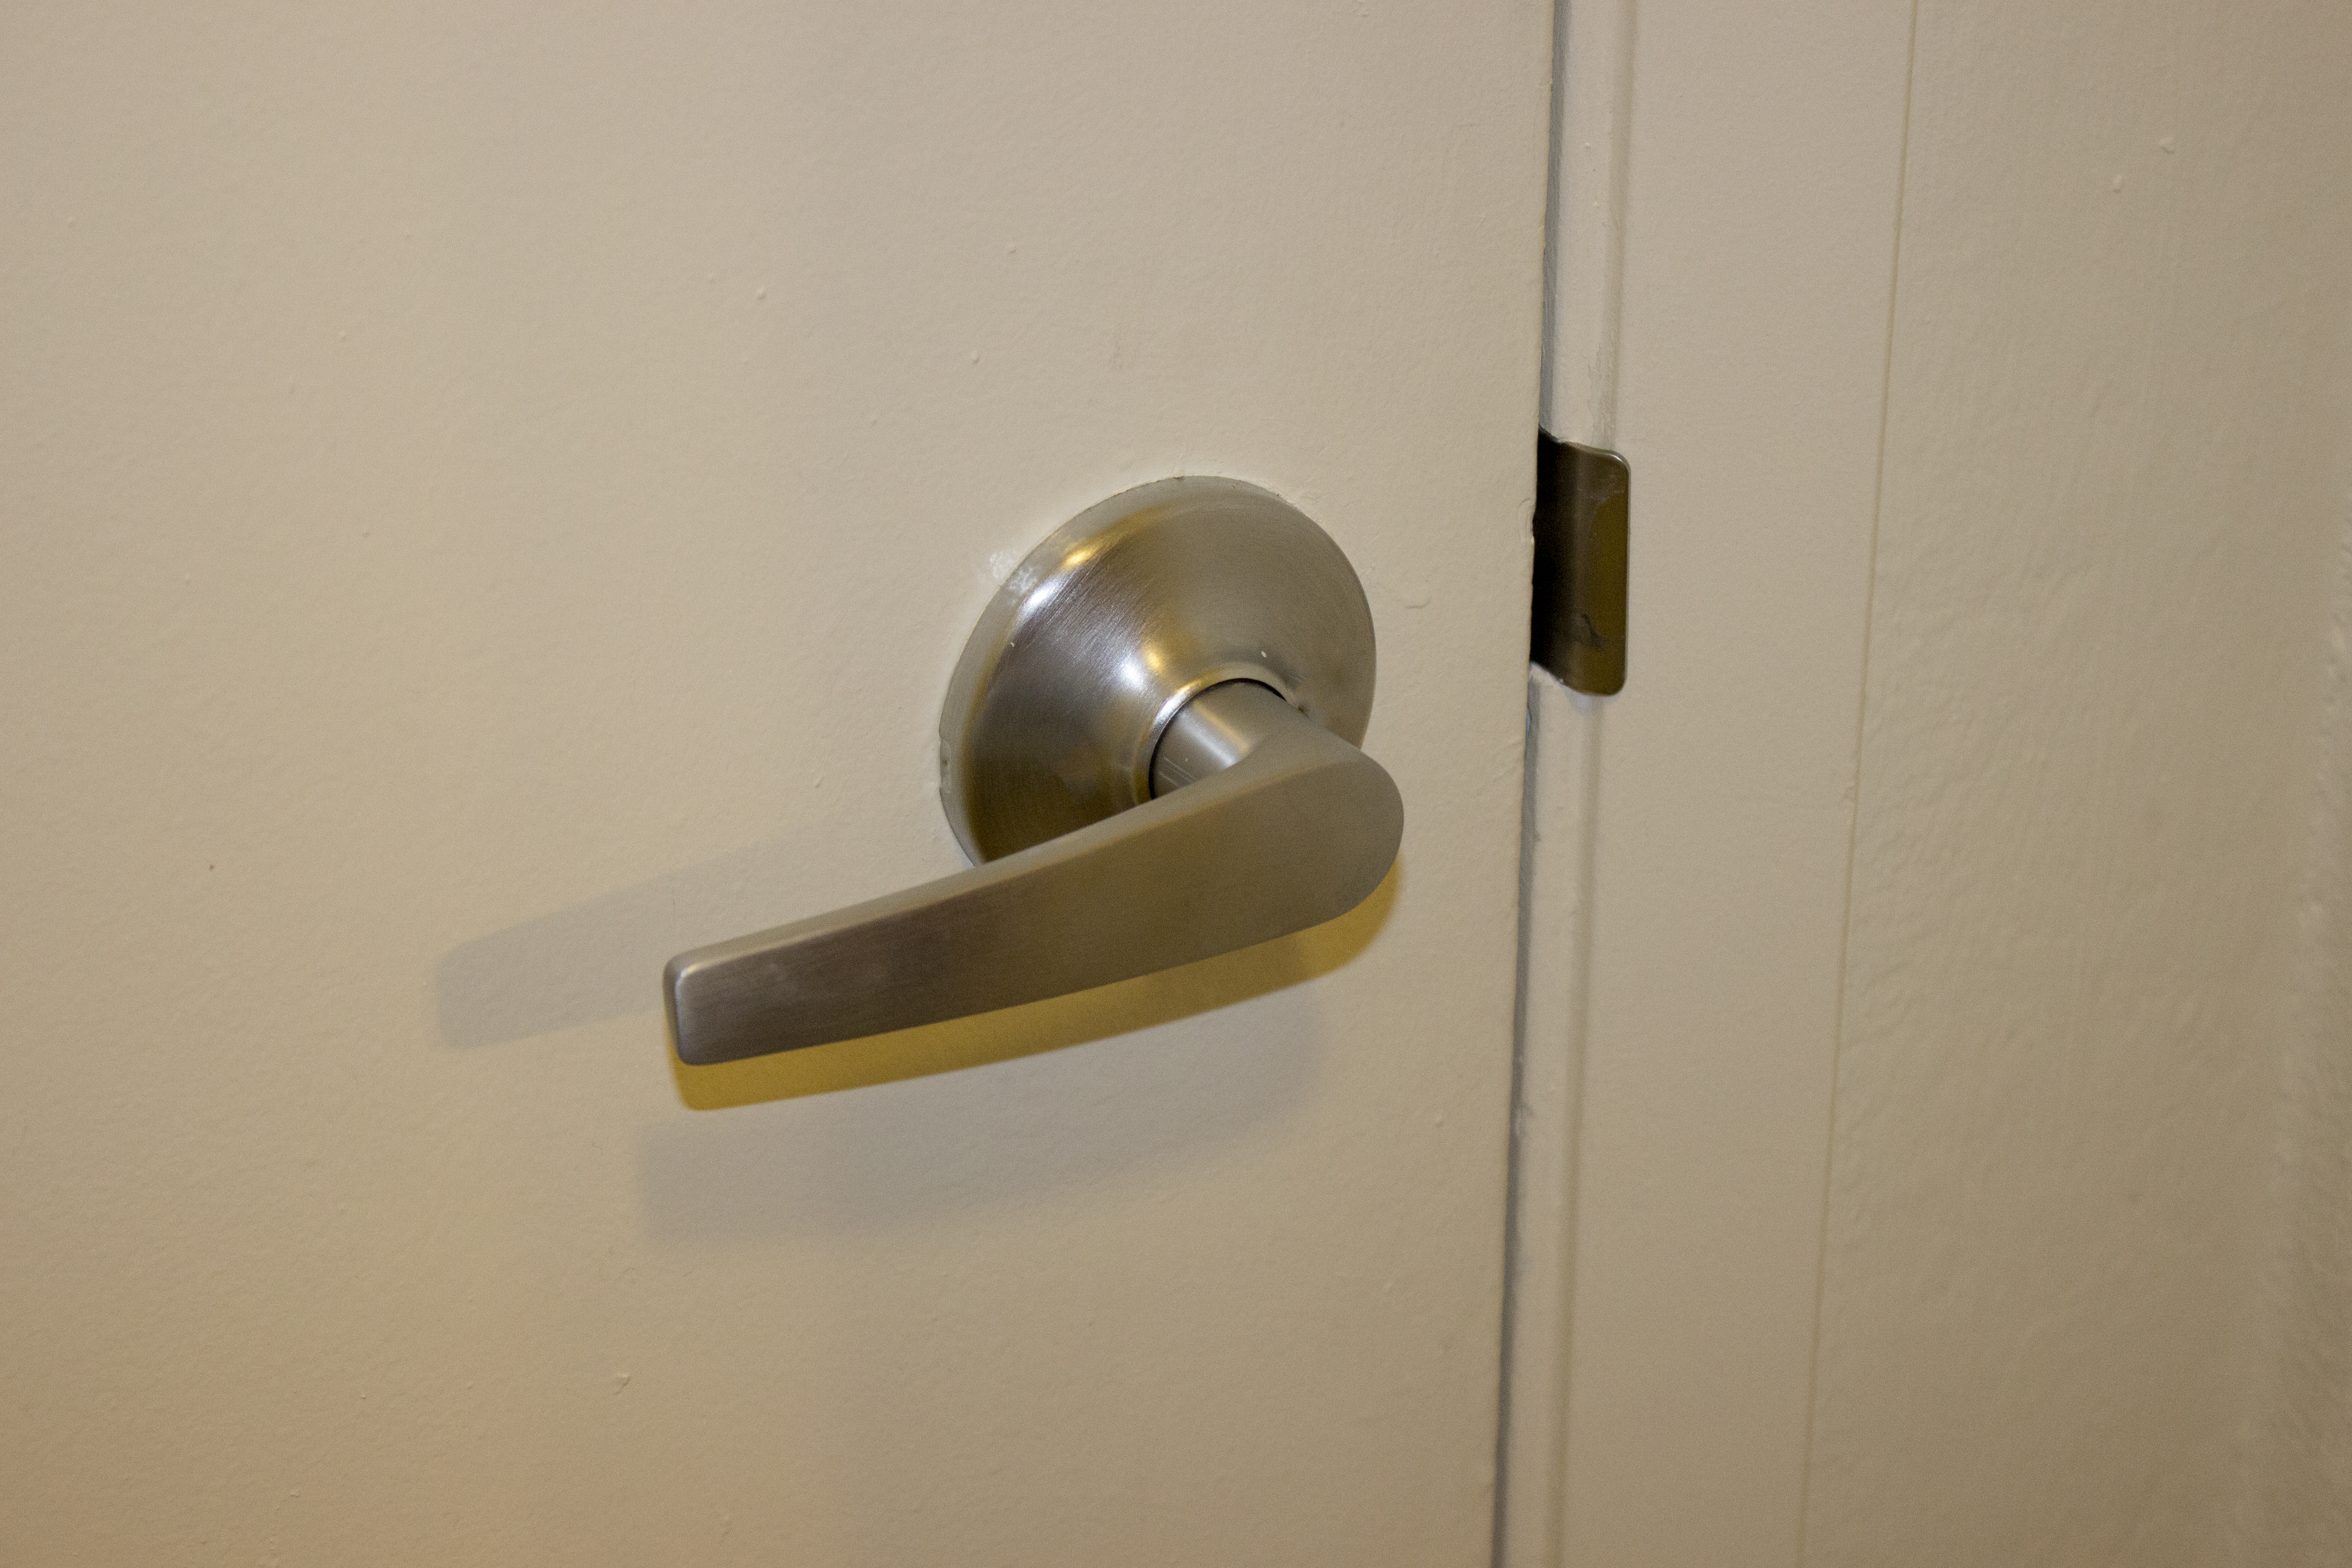 How to Remove a Lever Door Handle Without Screws